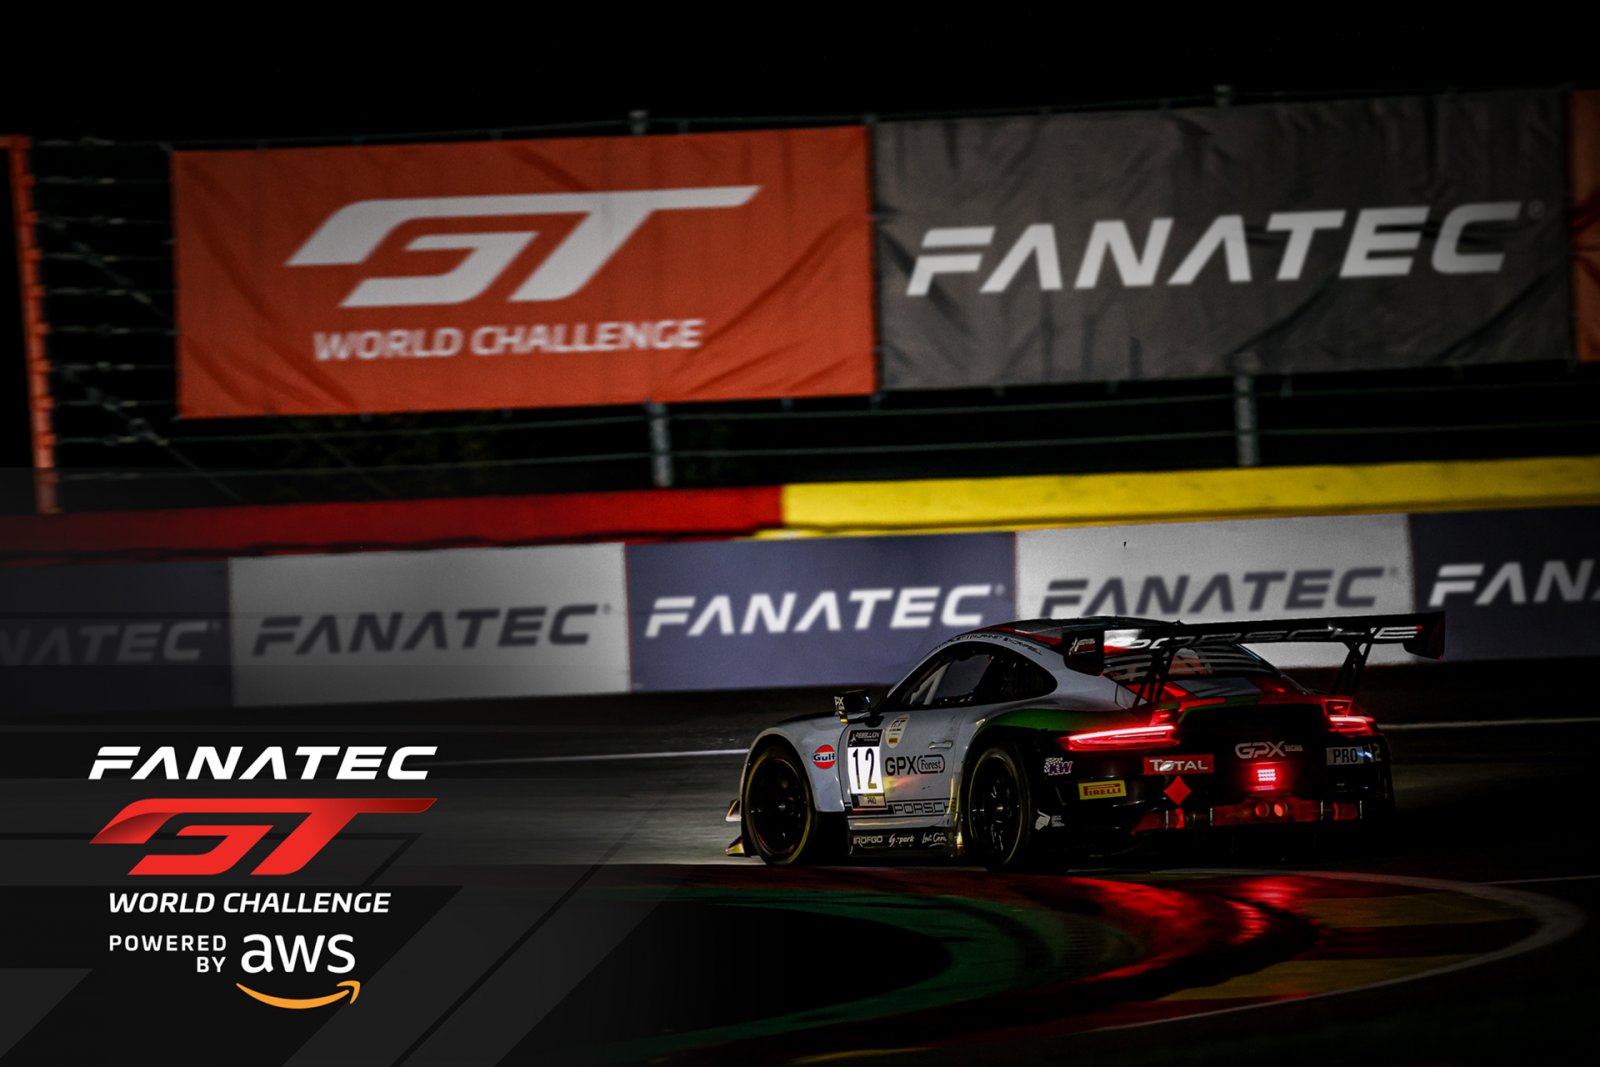 Fanatec named title sponsor of GT World Challenge Powered by AWS and GT2 European Series